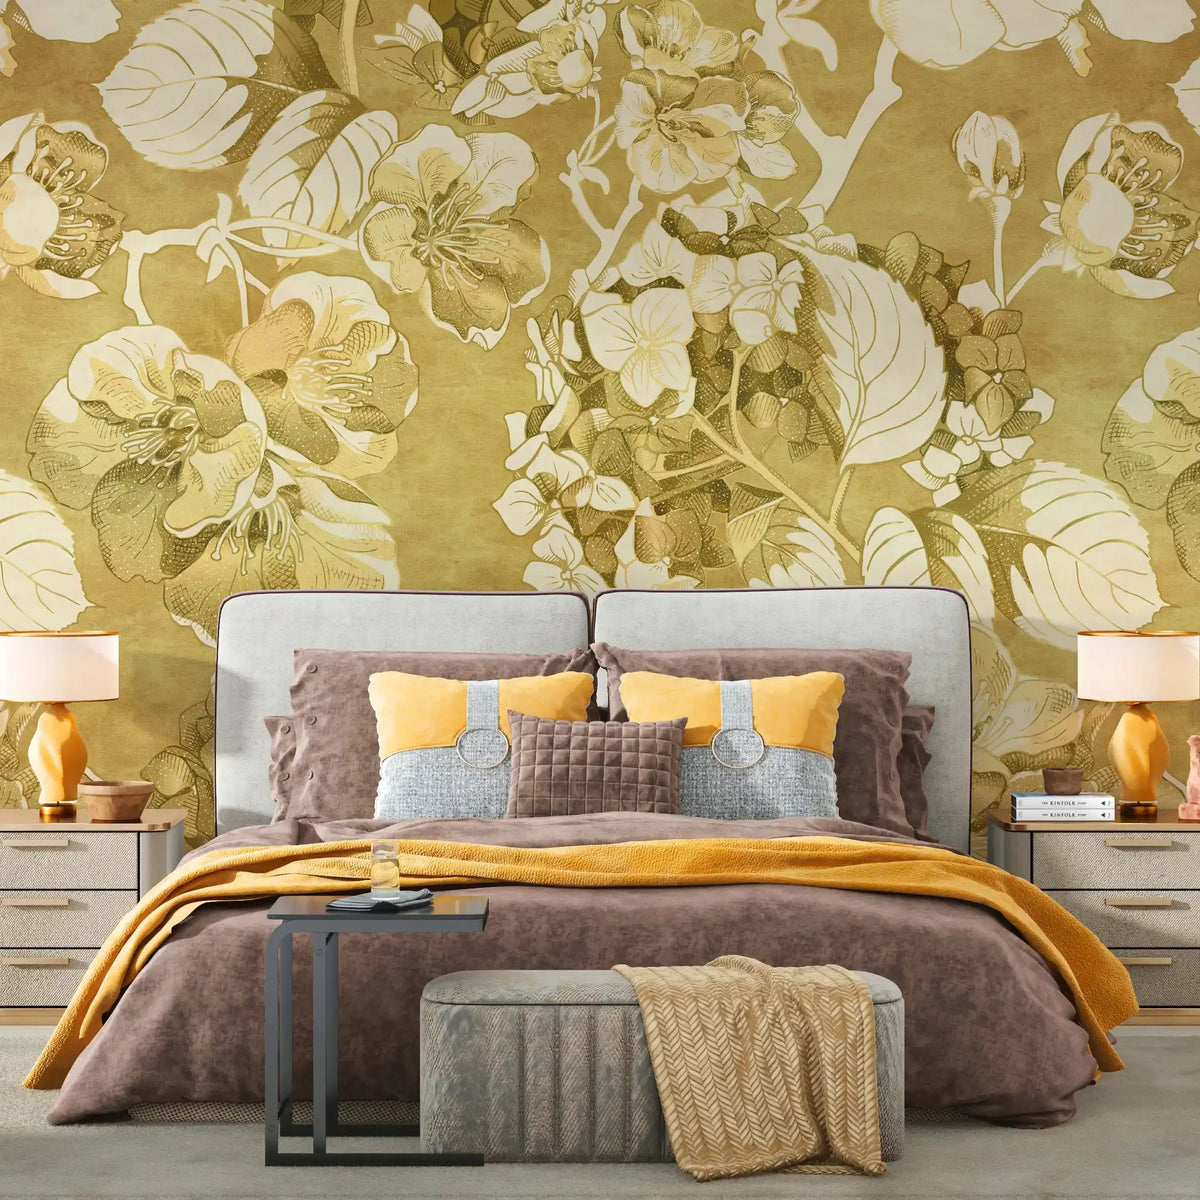 3036-C / Vintage Floral Mural Wallpaper: Yellow and Beige Art Style, Easy Install for Accent Wall Decor and Bathroom - Artevella